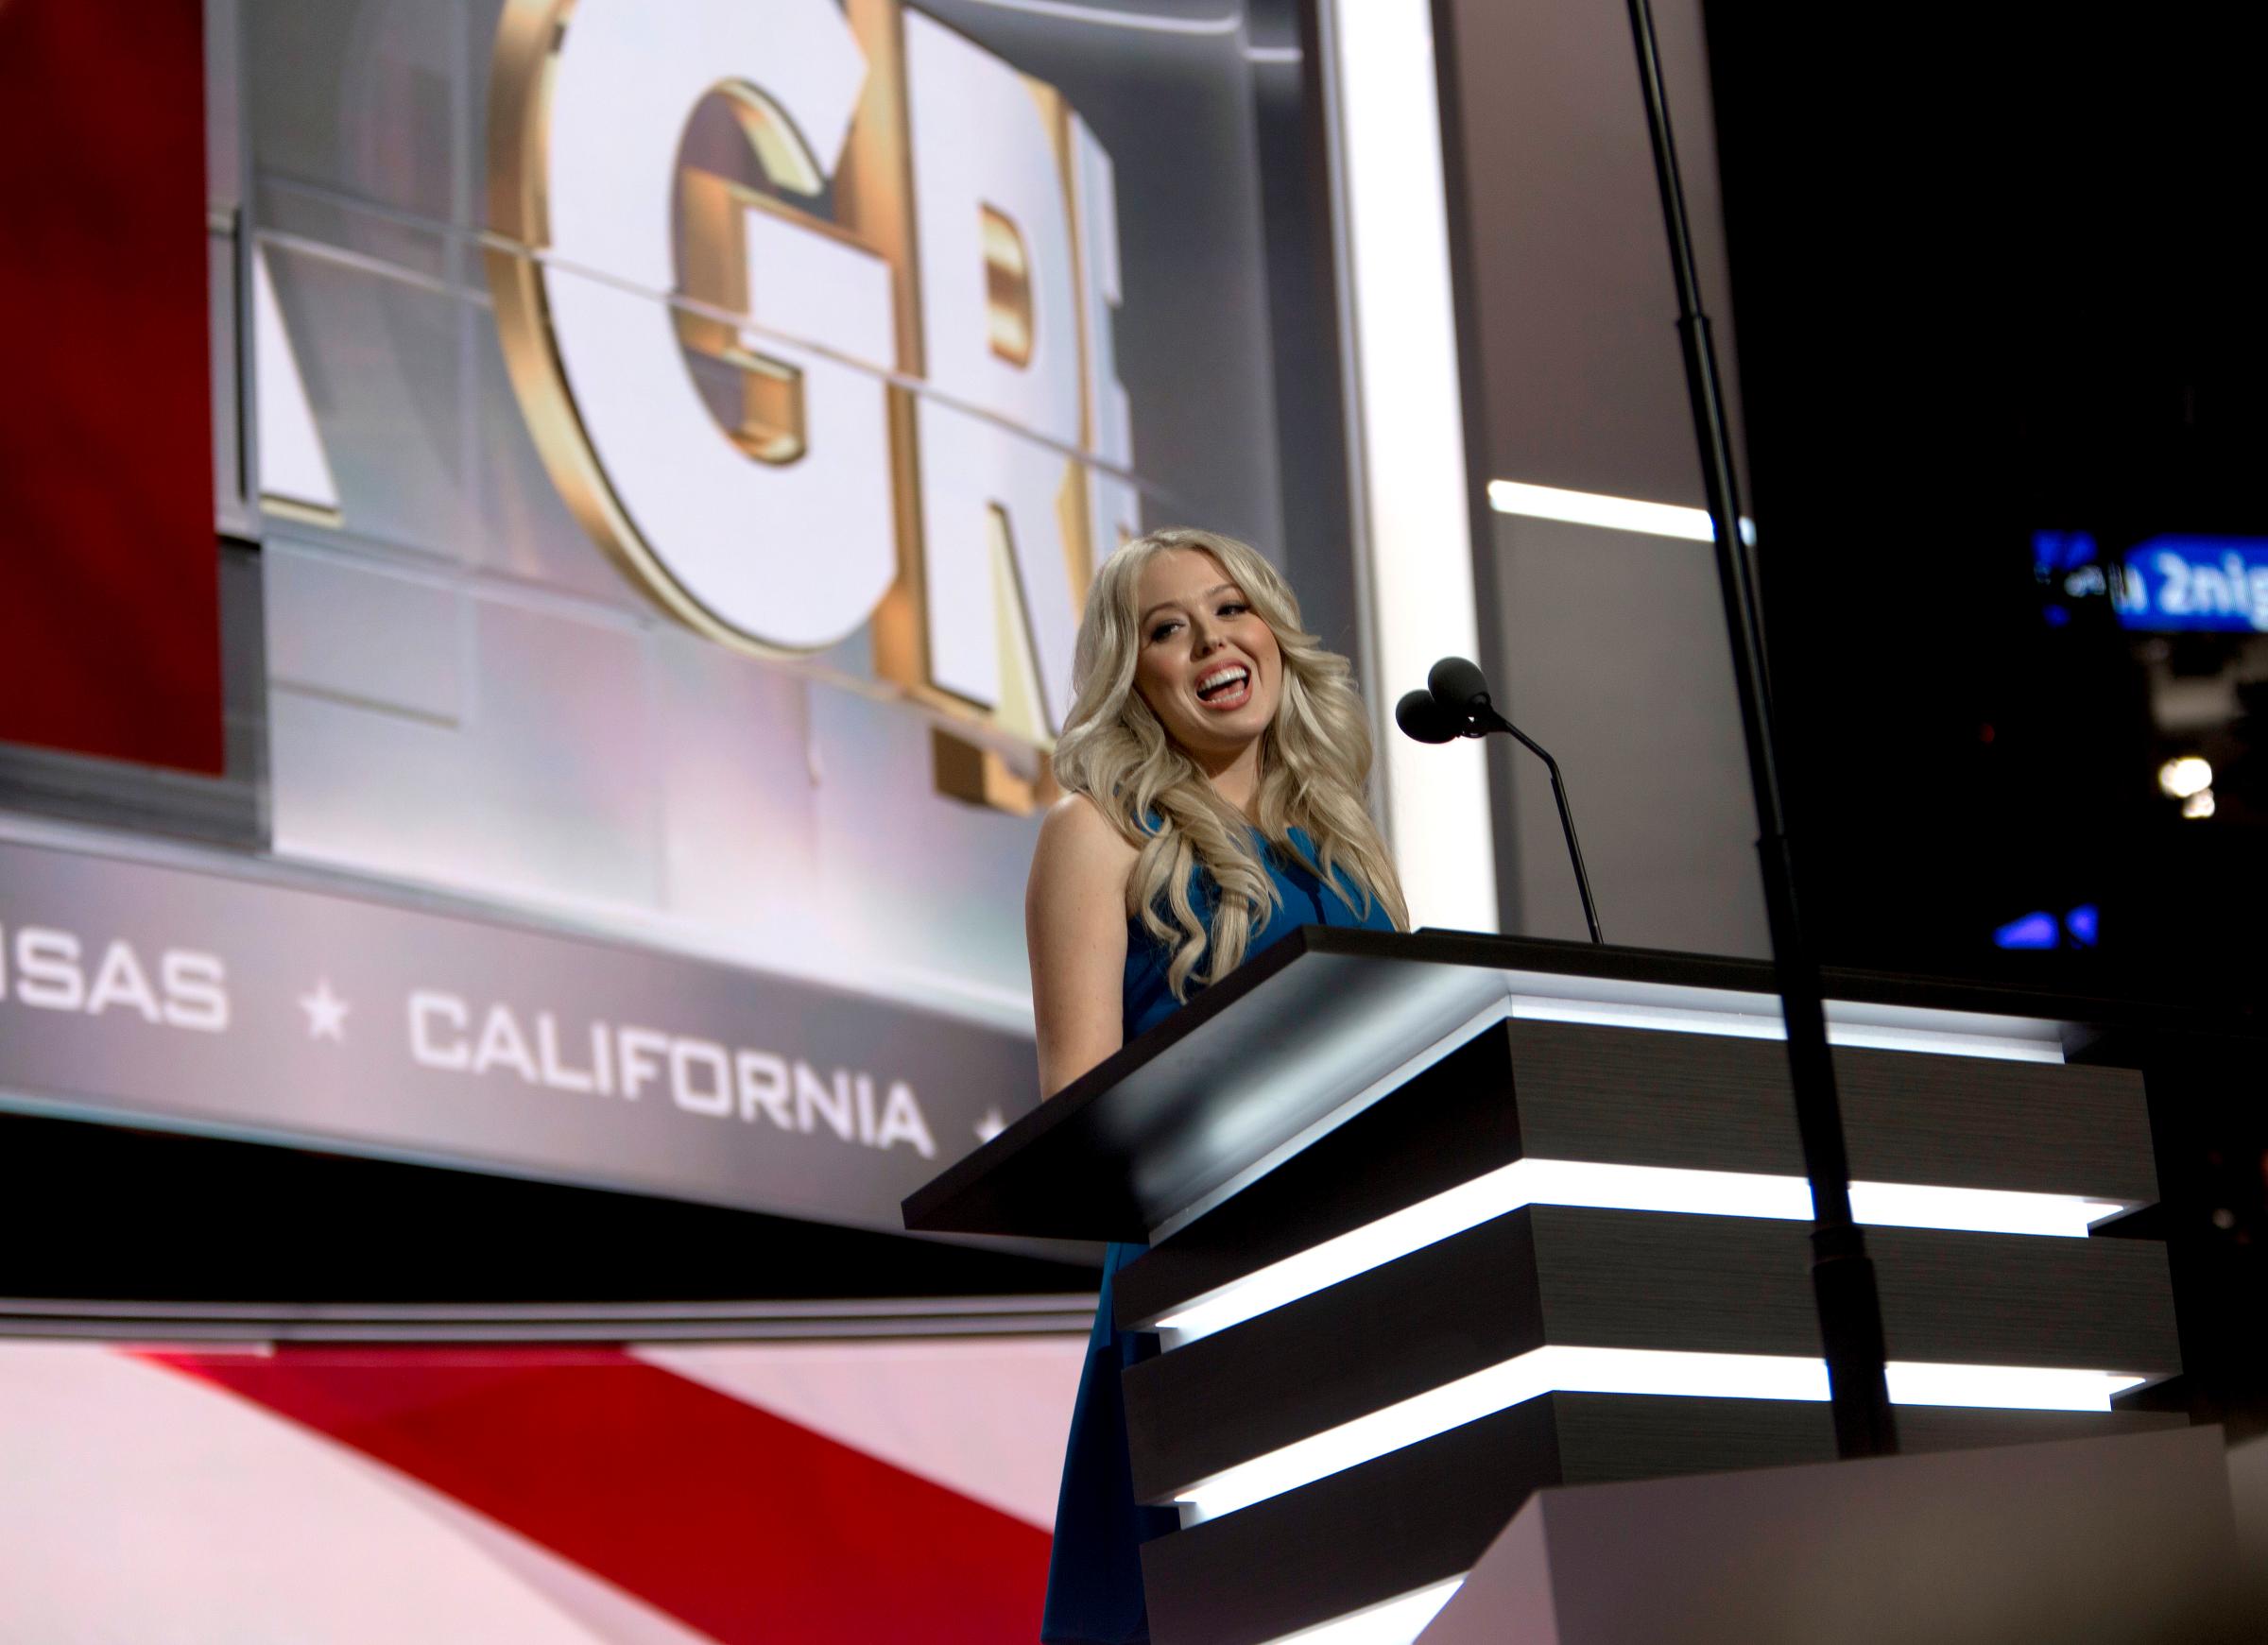 Tiffany Trump speaks at the Republican National Convention in Cleveland on July 19, 2016.